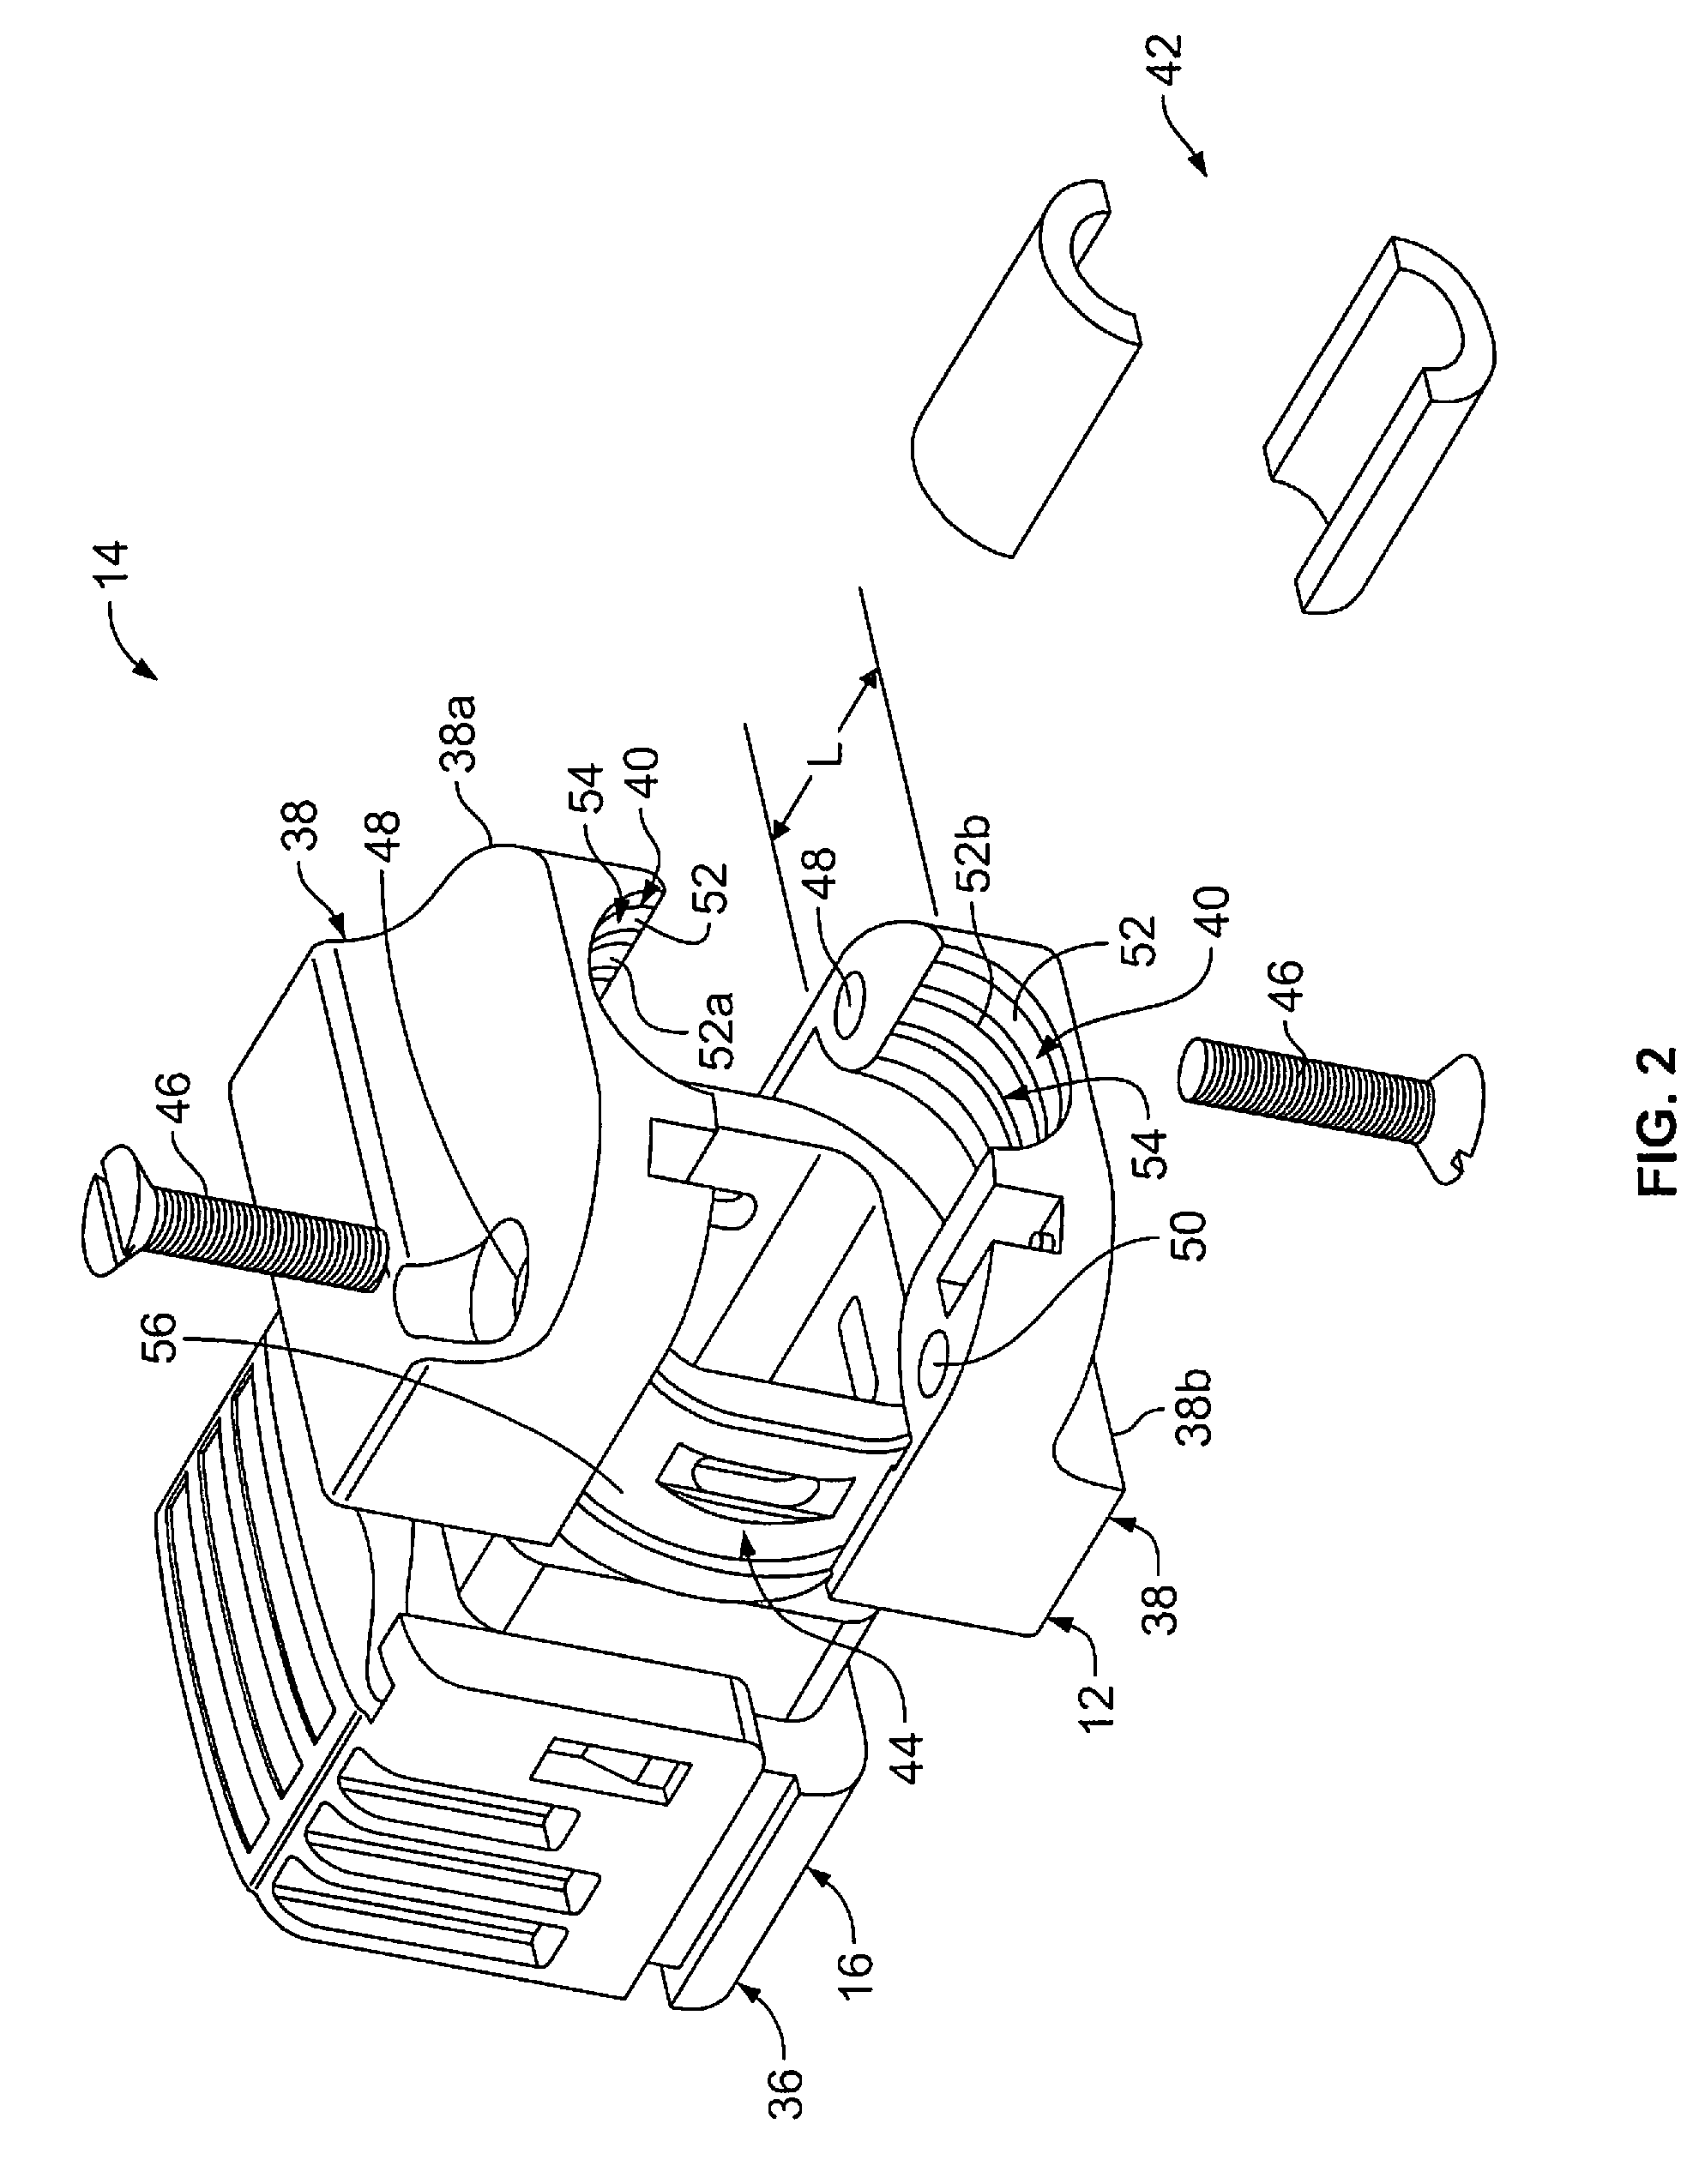 Electrical connector having an EMI absorber